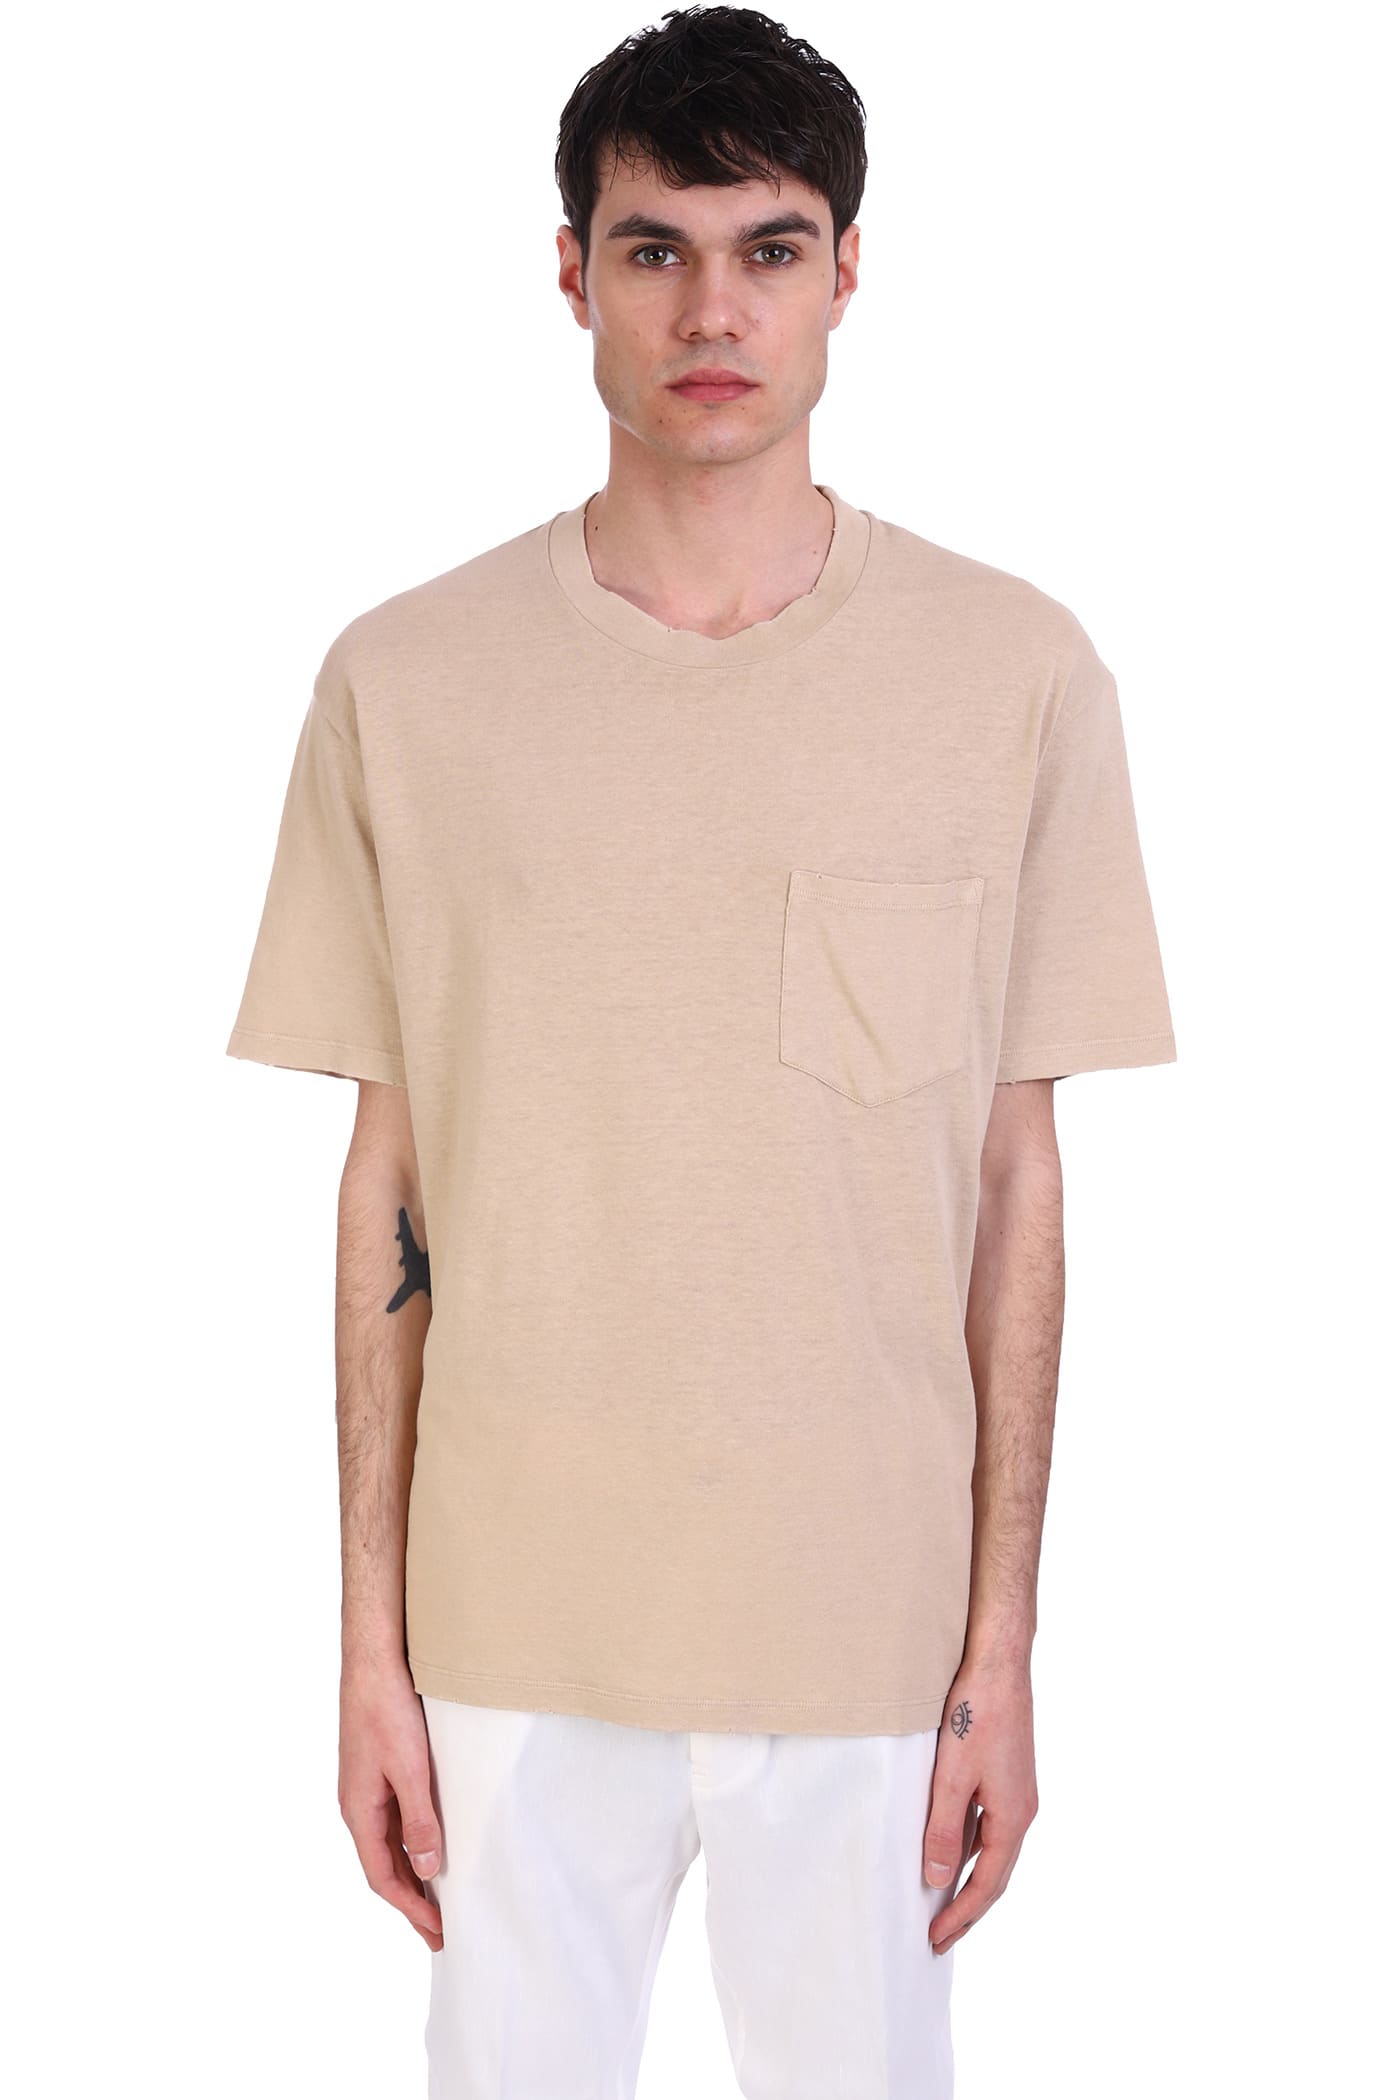 Mauro Grifoni T-shirt In Beige Cotton